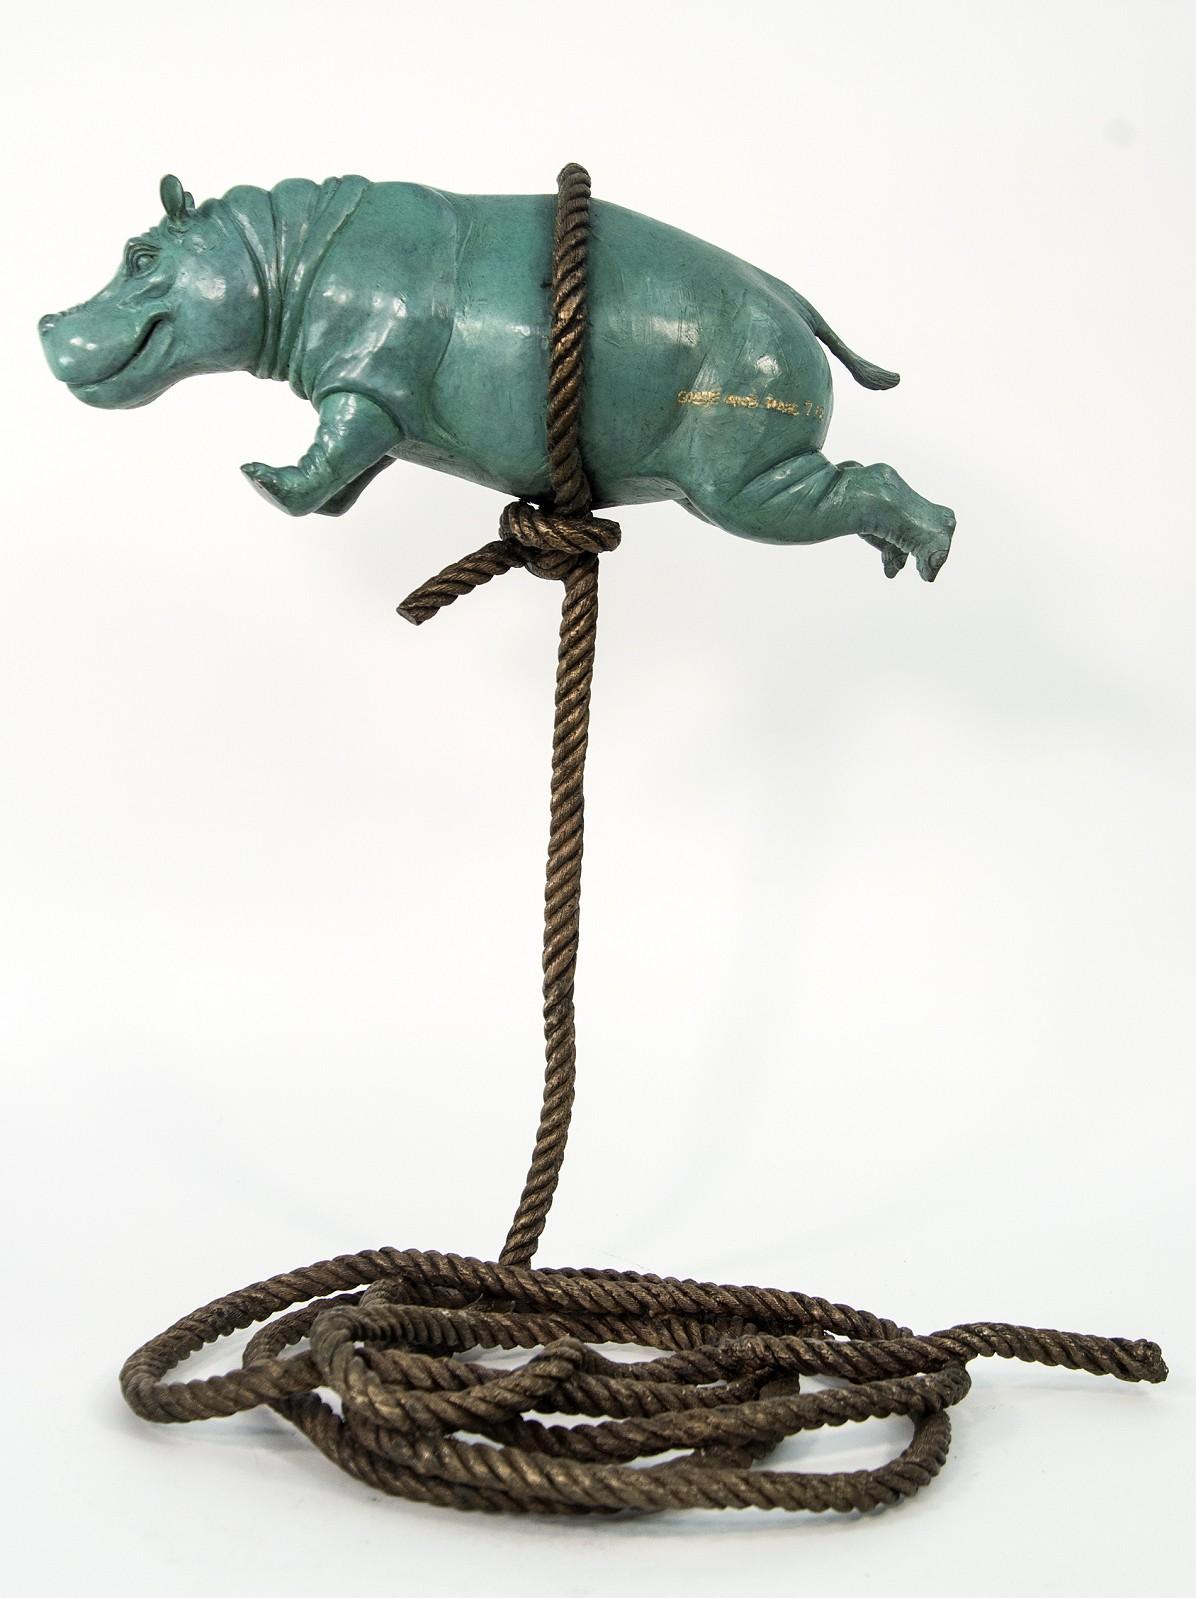 Green Flying Hippo Ed. 7/8 - figurative, playful, contemporary bronze sculpture - Contemporary Sculpture by Gillie and Marc Schattner